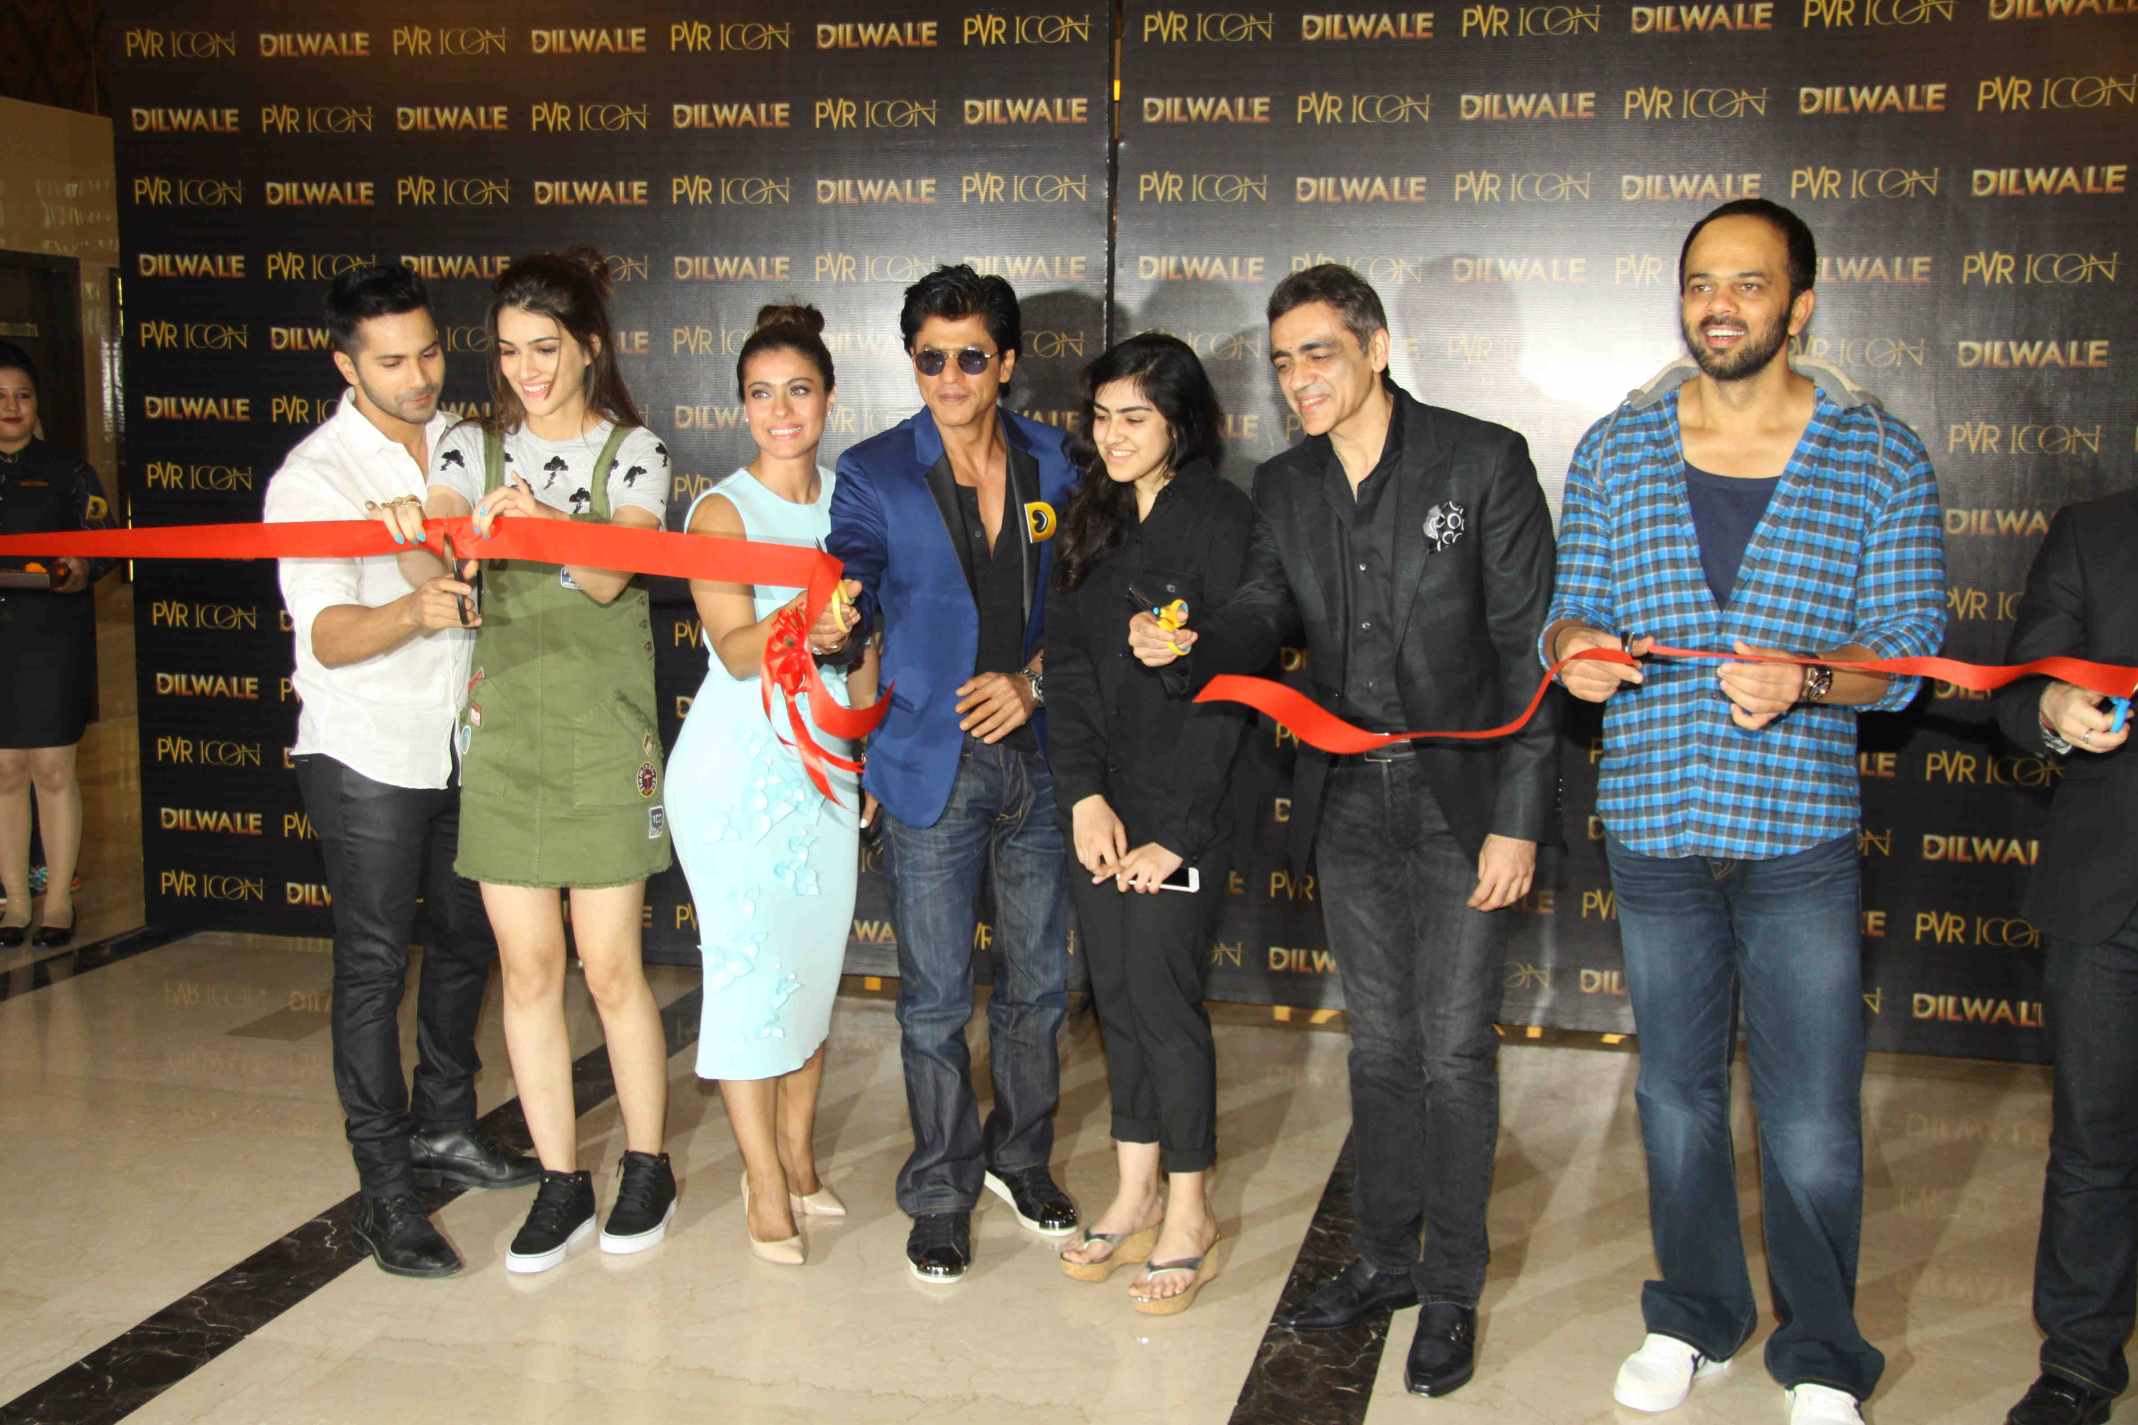 Song launch of Manma Emotion Jaage Re from Dilwale film